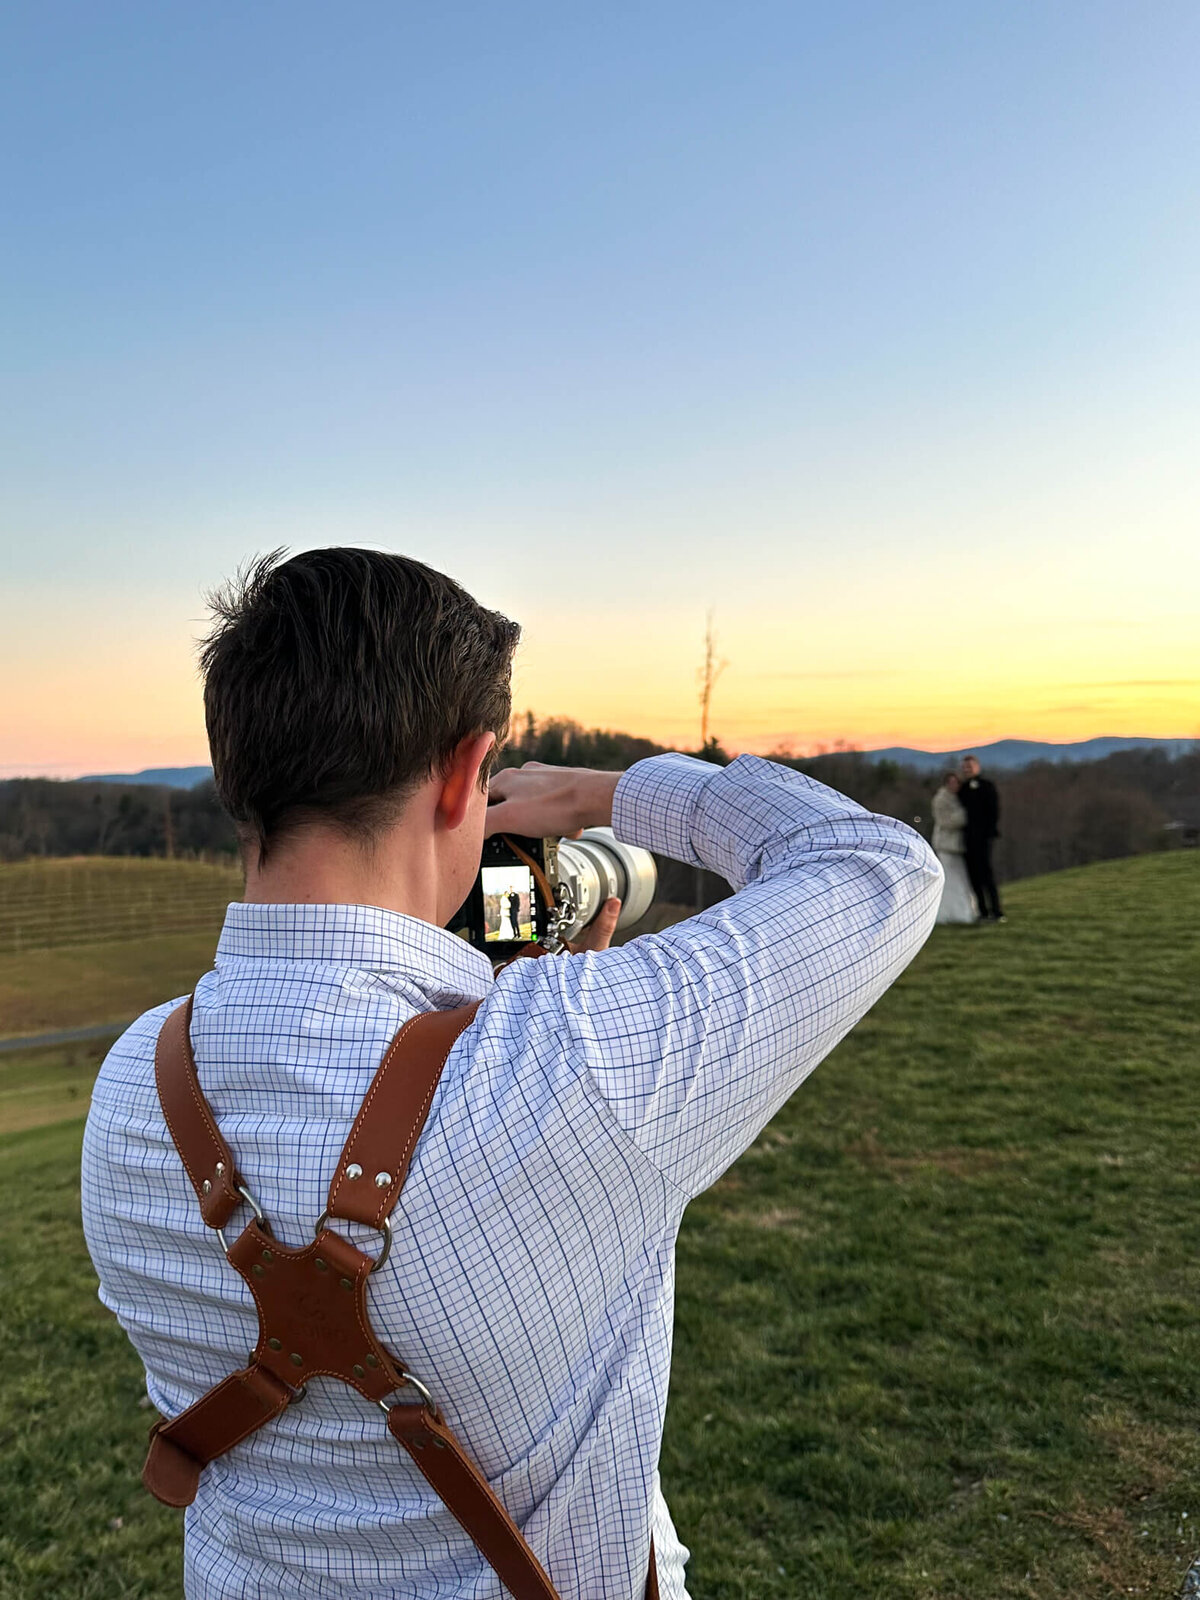 Photo of Michael Fricke, owner of Michael Fricke Photography, capturing a wedding couple during their sunset portrait session on their wedding day